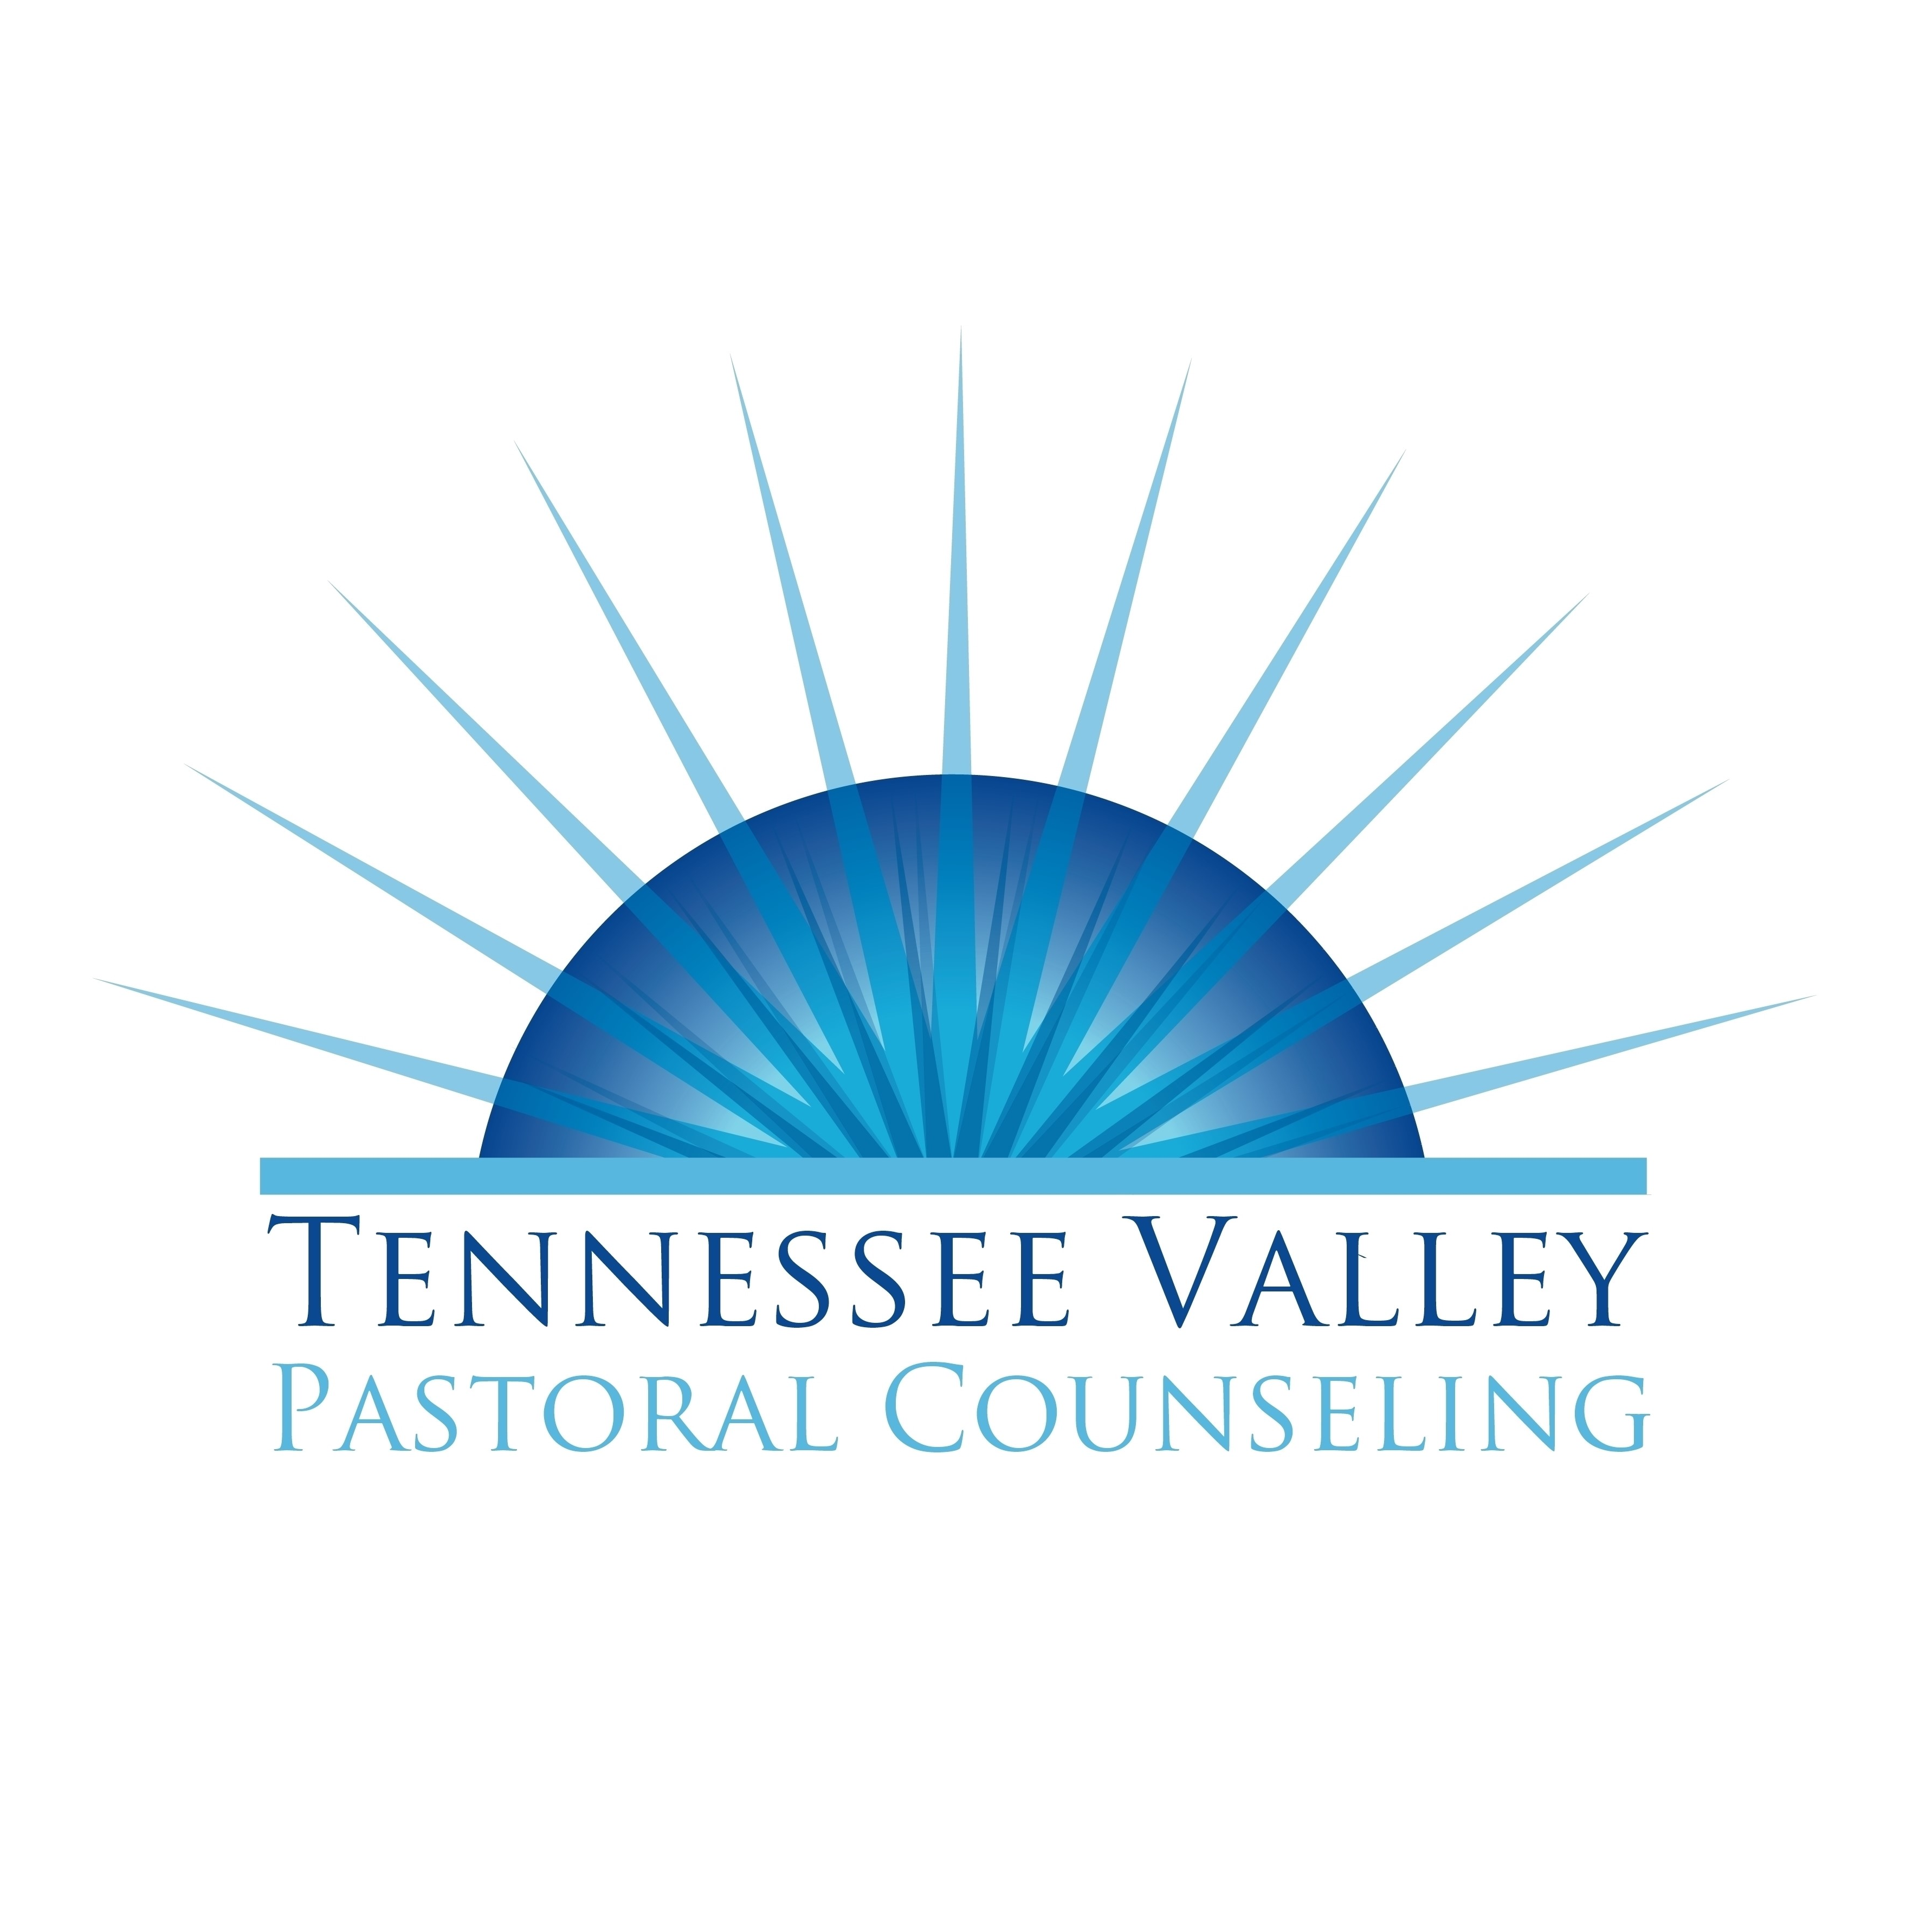 Tennessee Valley Pastoral Counseling logo